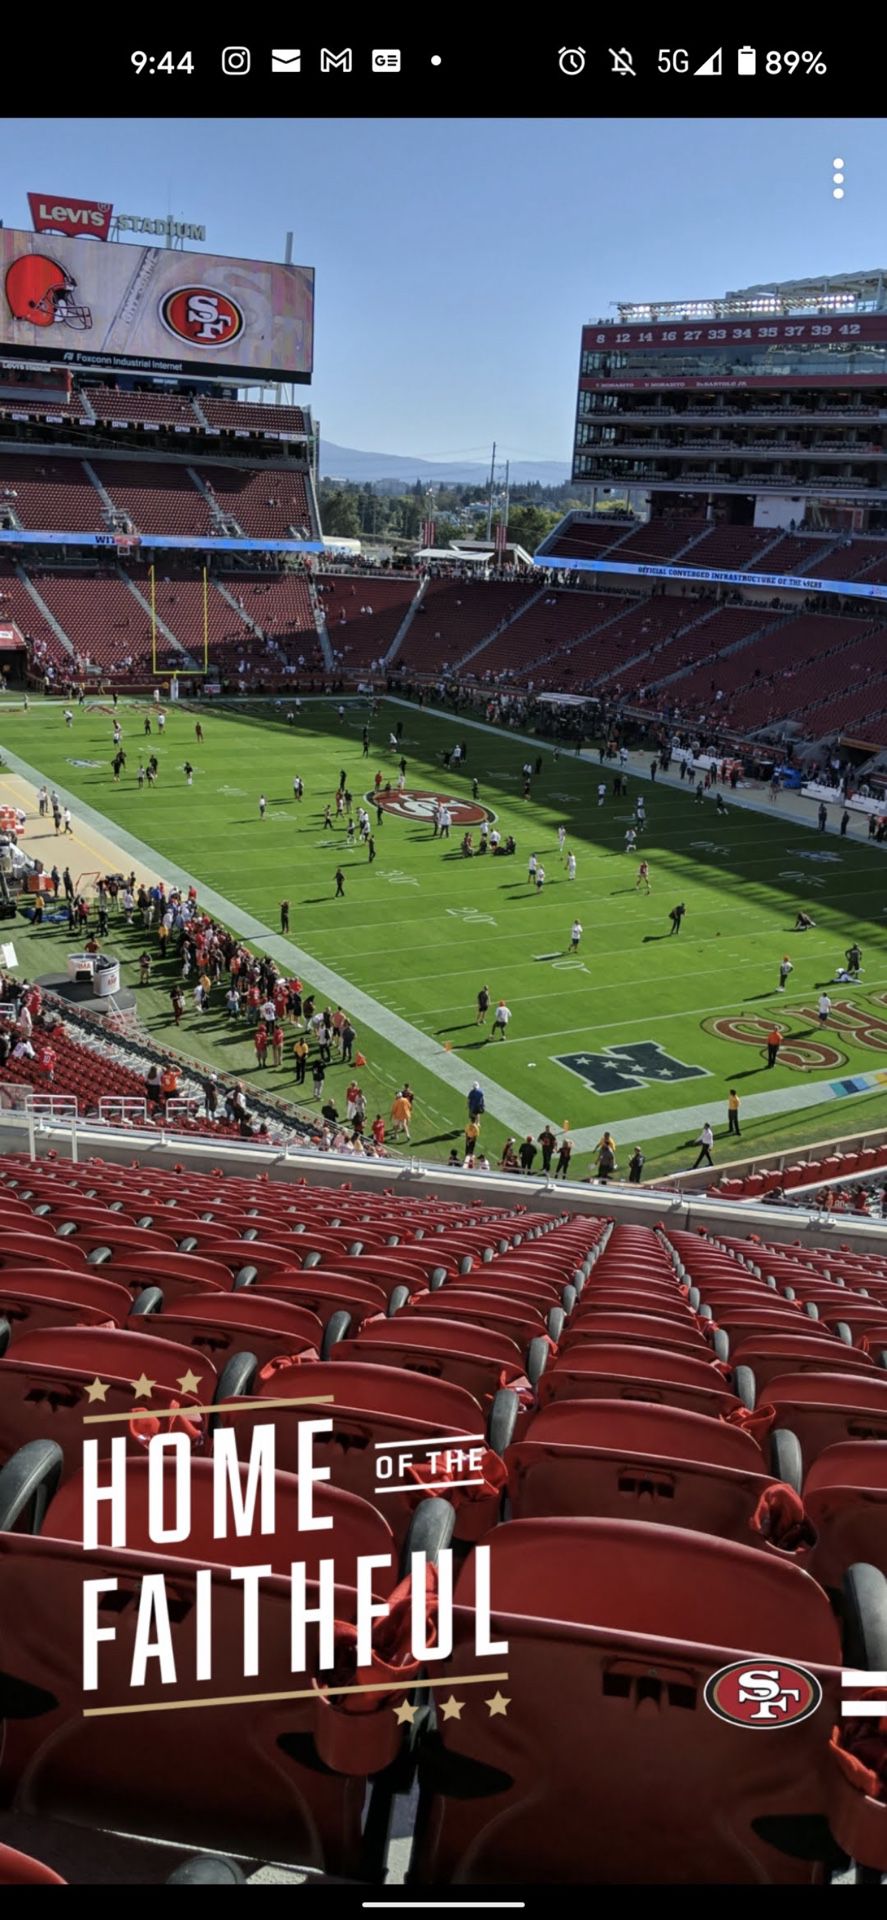 49ers Vs Tampa Section 207 Row 18 2 Seats 